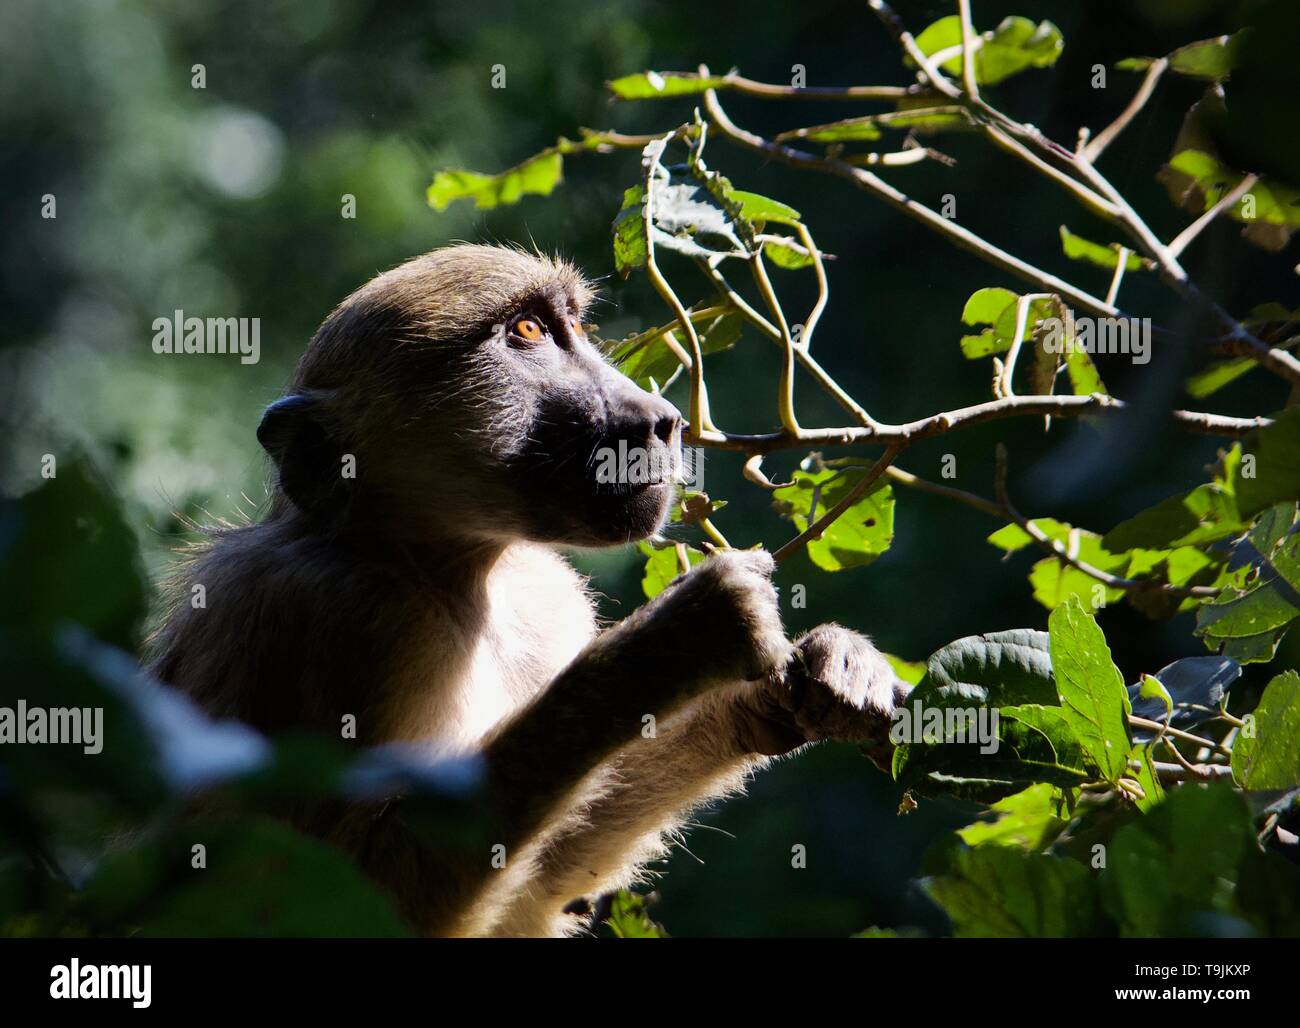 A young baboon stares thoughtfully whilst picking and gnawing at branches. The innocence and gentleness captured in his eyes is heart touching. Stock Photo